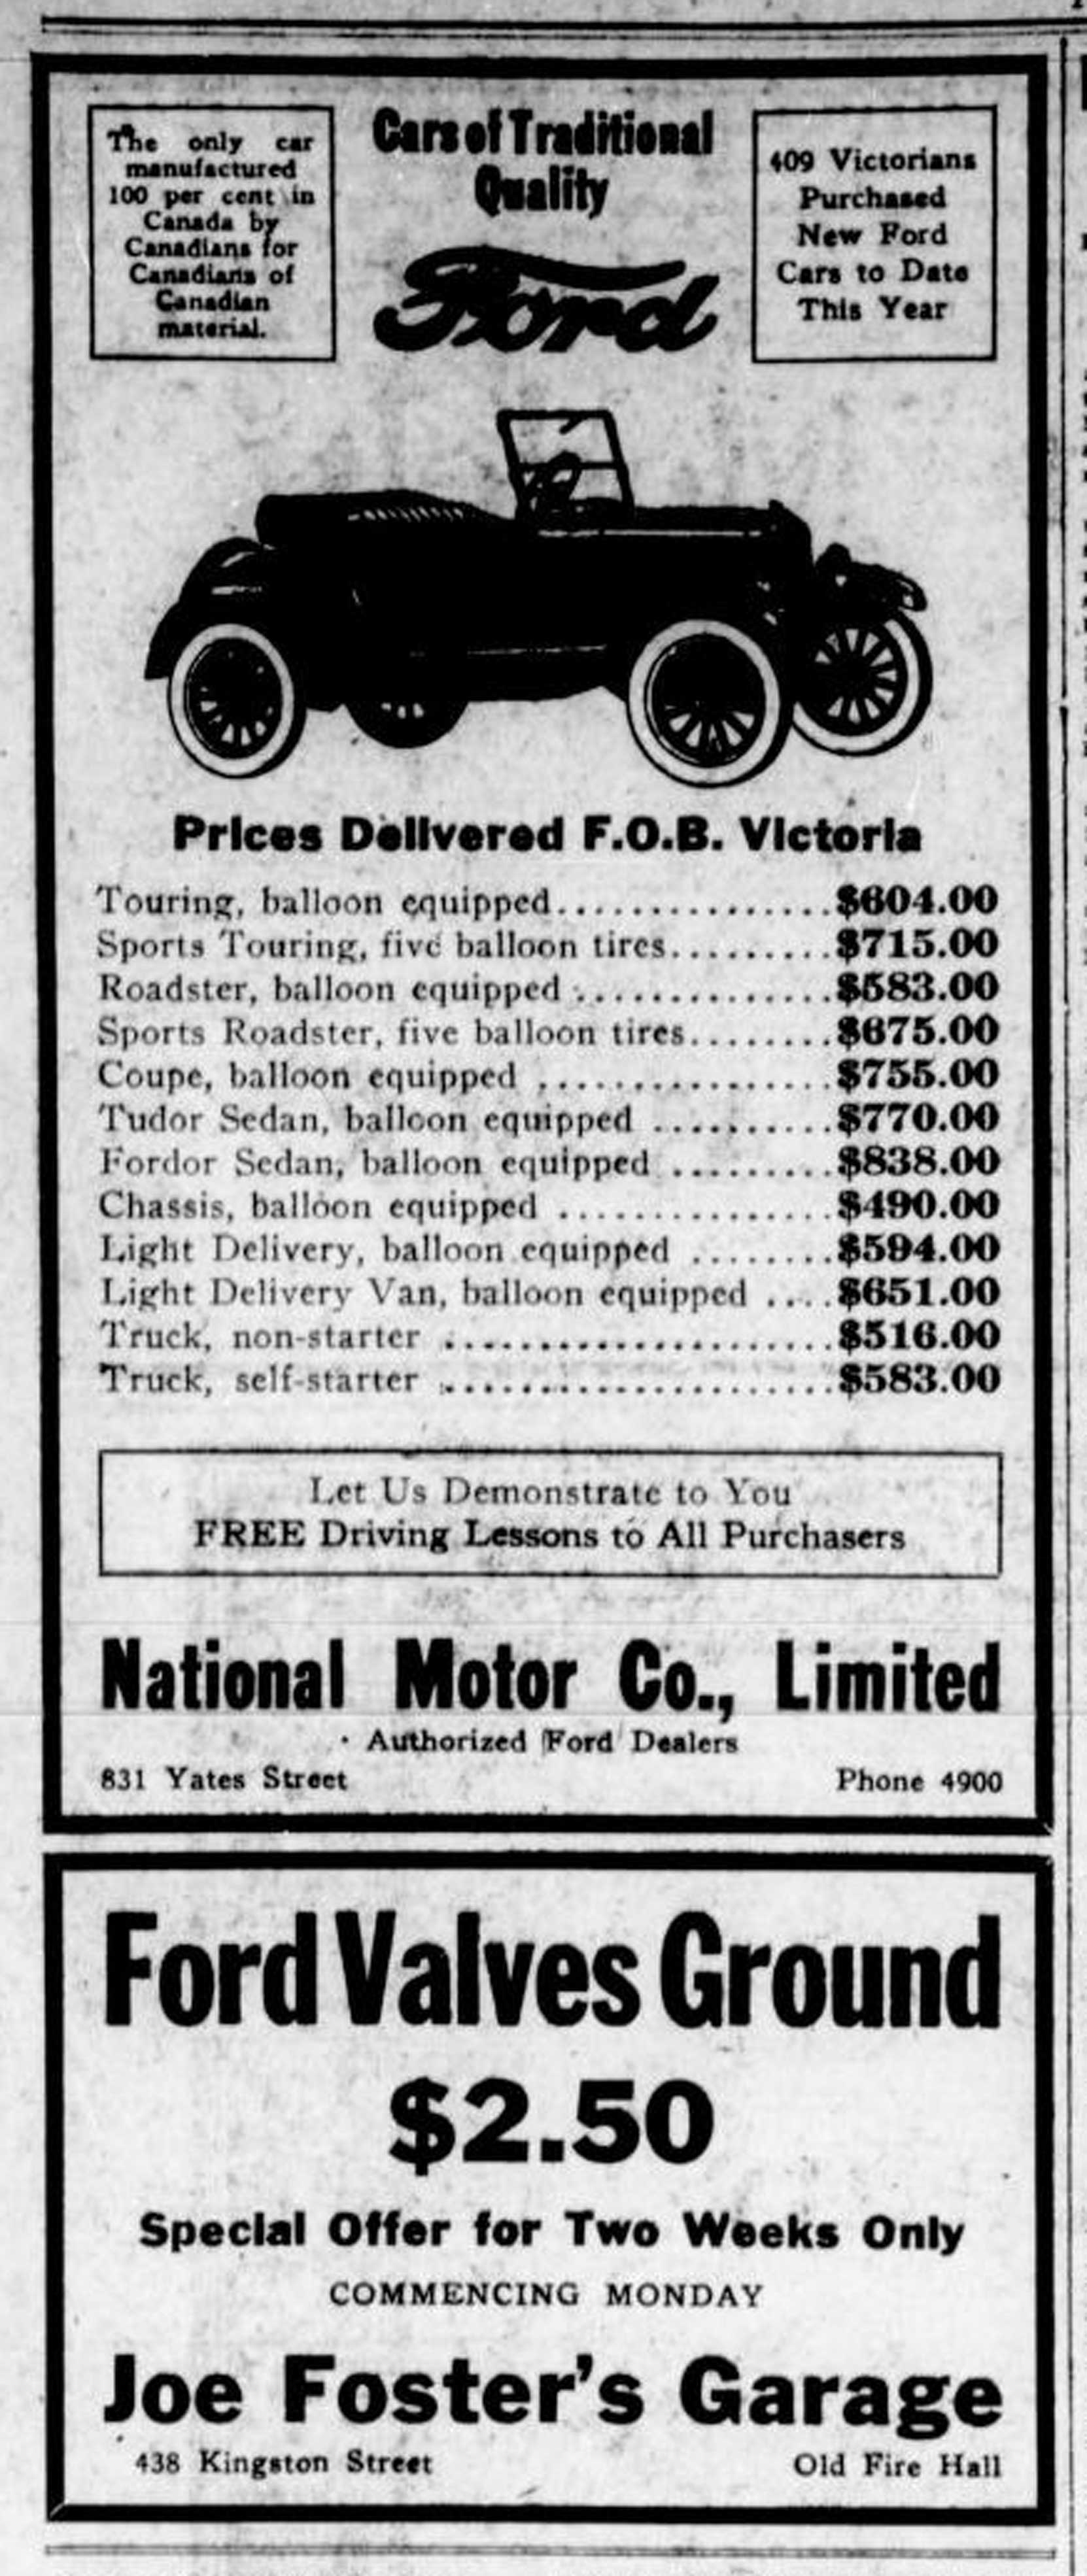 1926 advertisement for Ford automobiles, placed by National Motor Company, 831 Yates Street. (Victoria Online Sightseeing Tours collection)